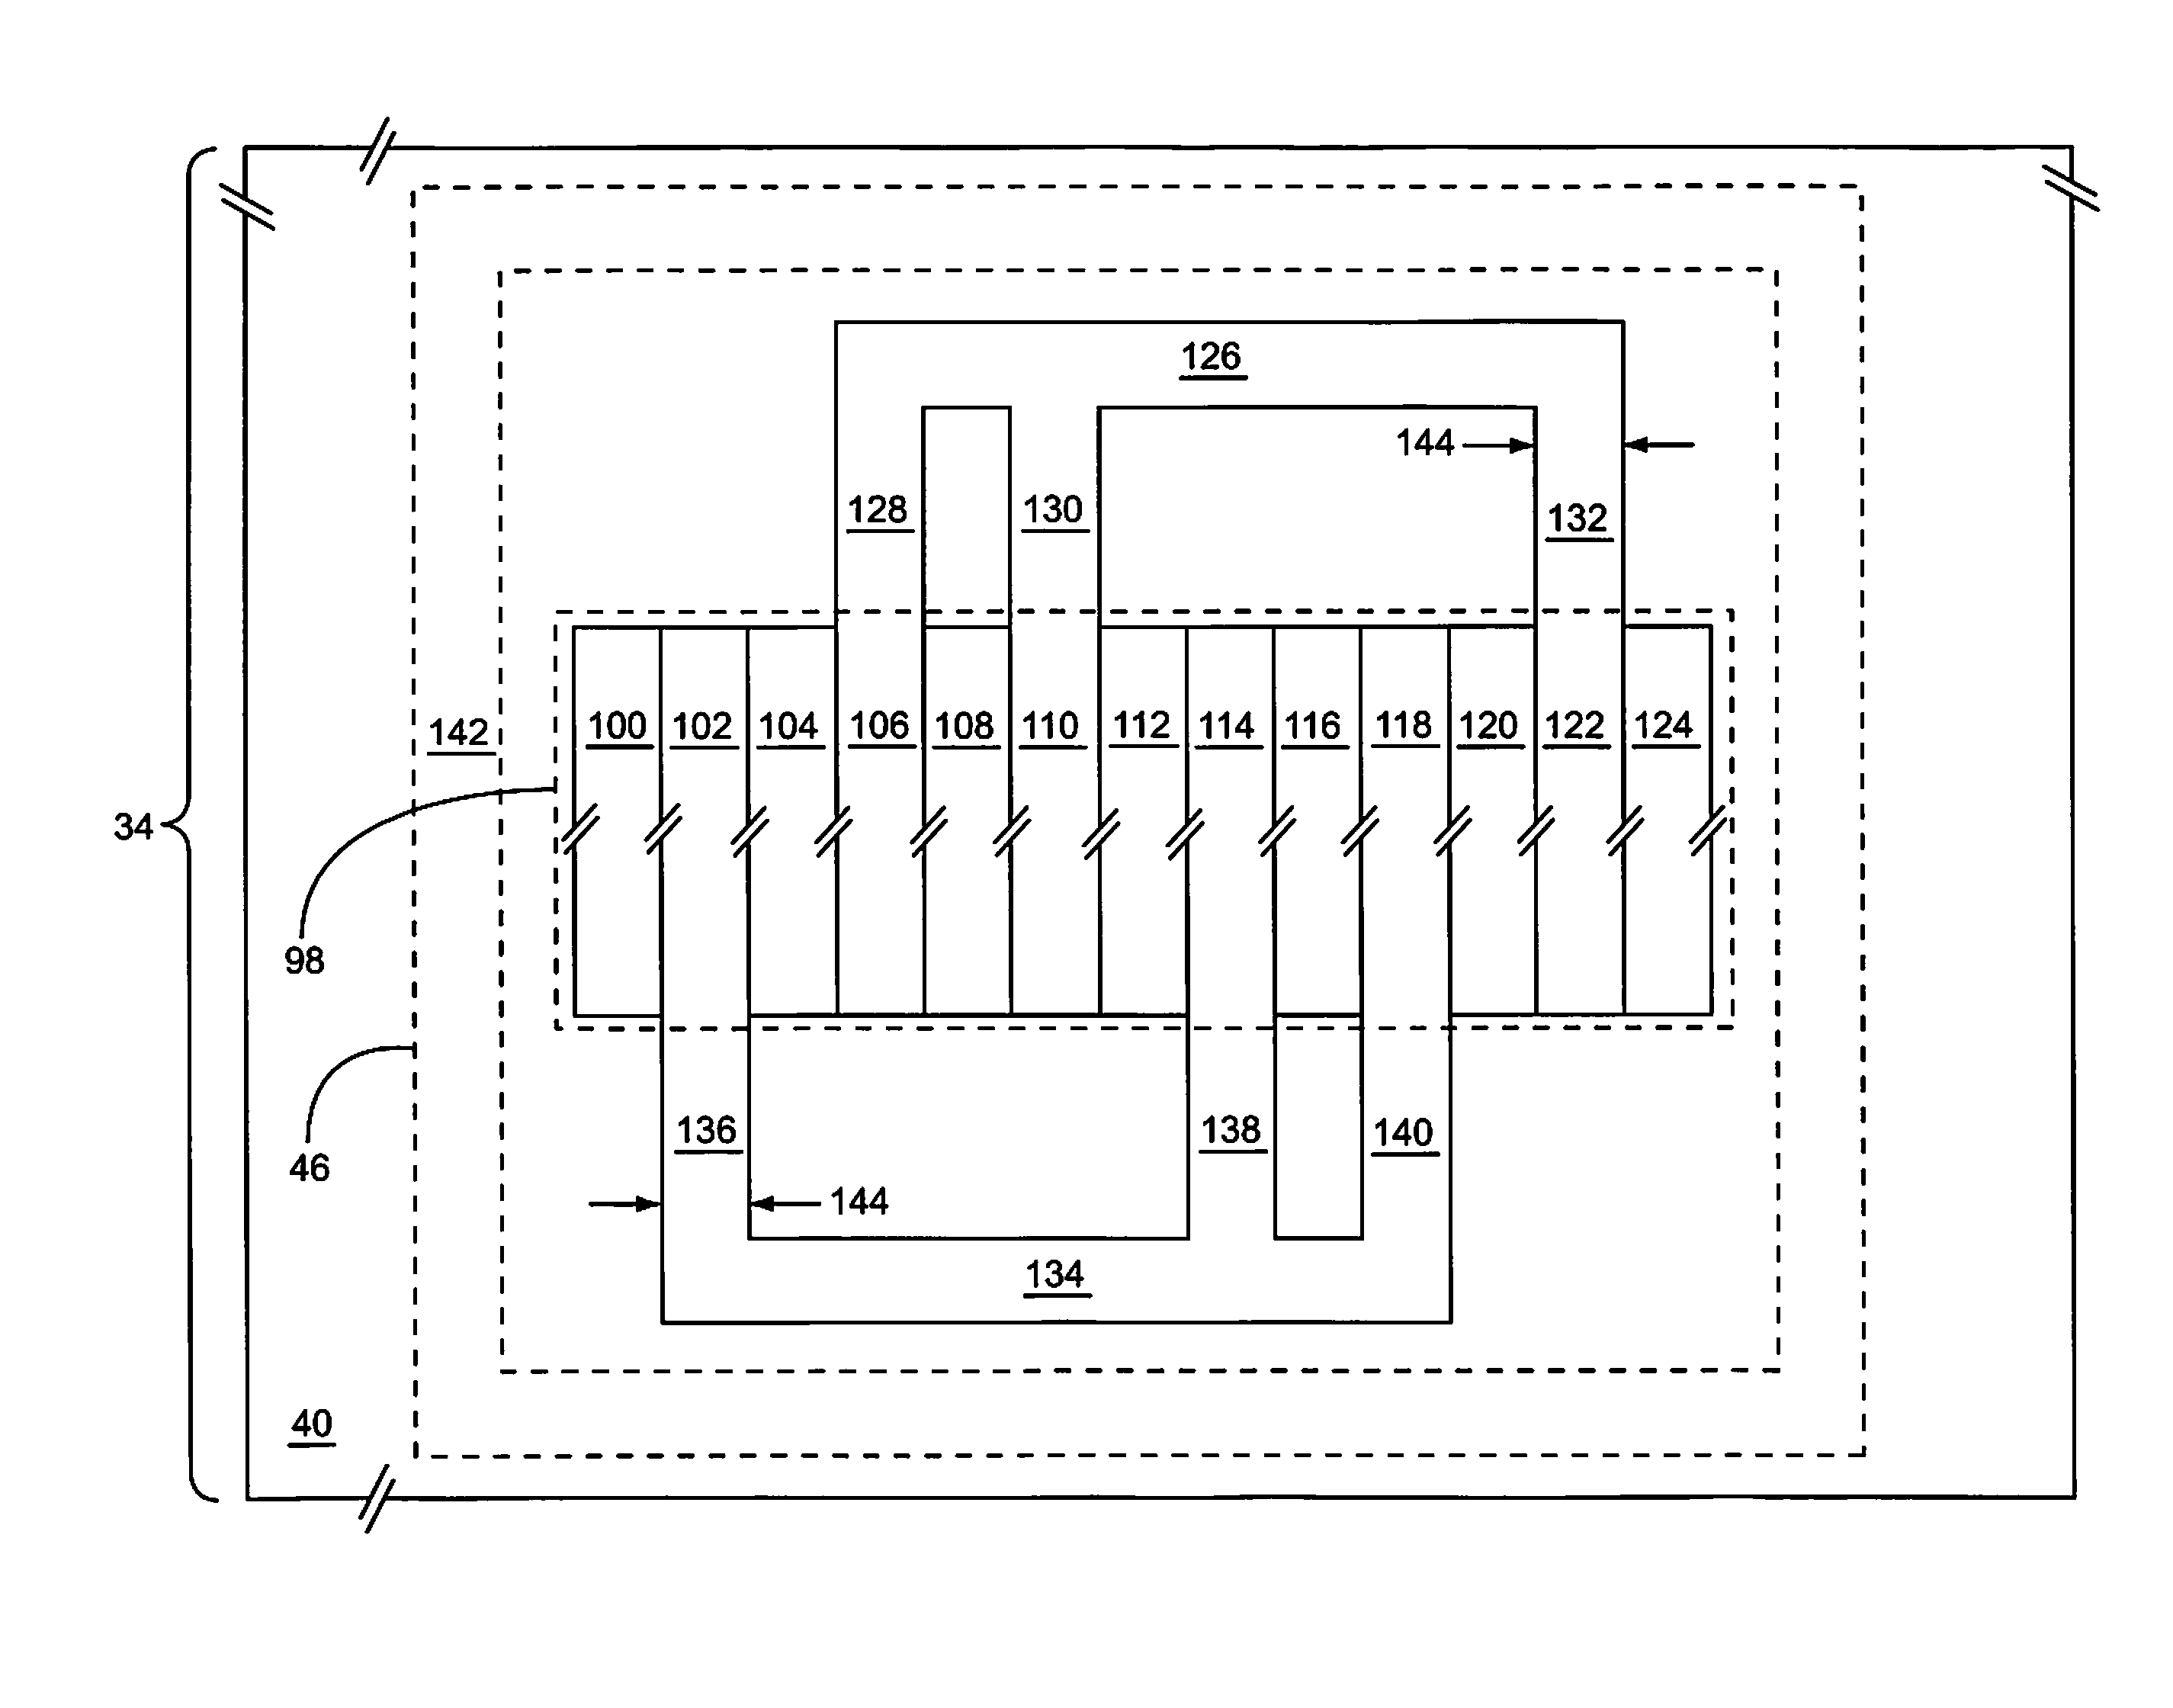 Stacked body-contacted field effect transistor